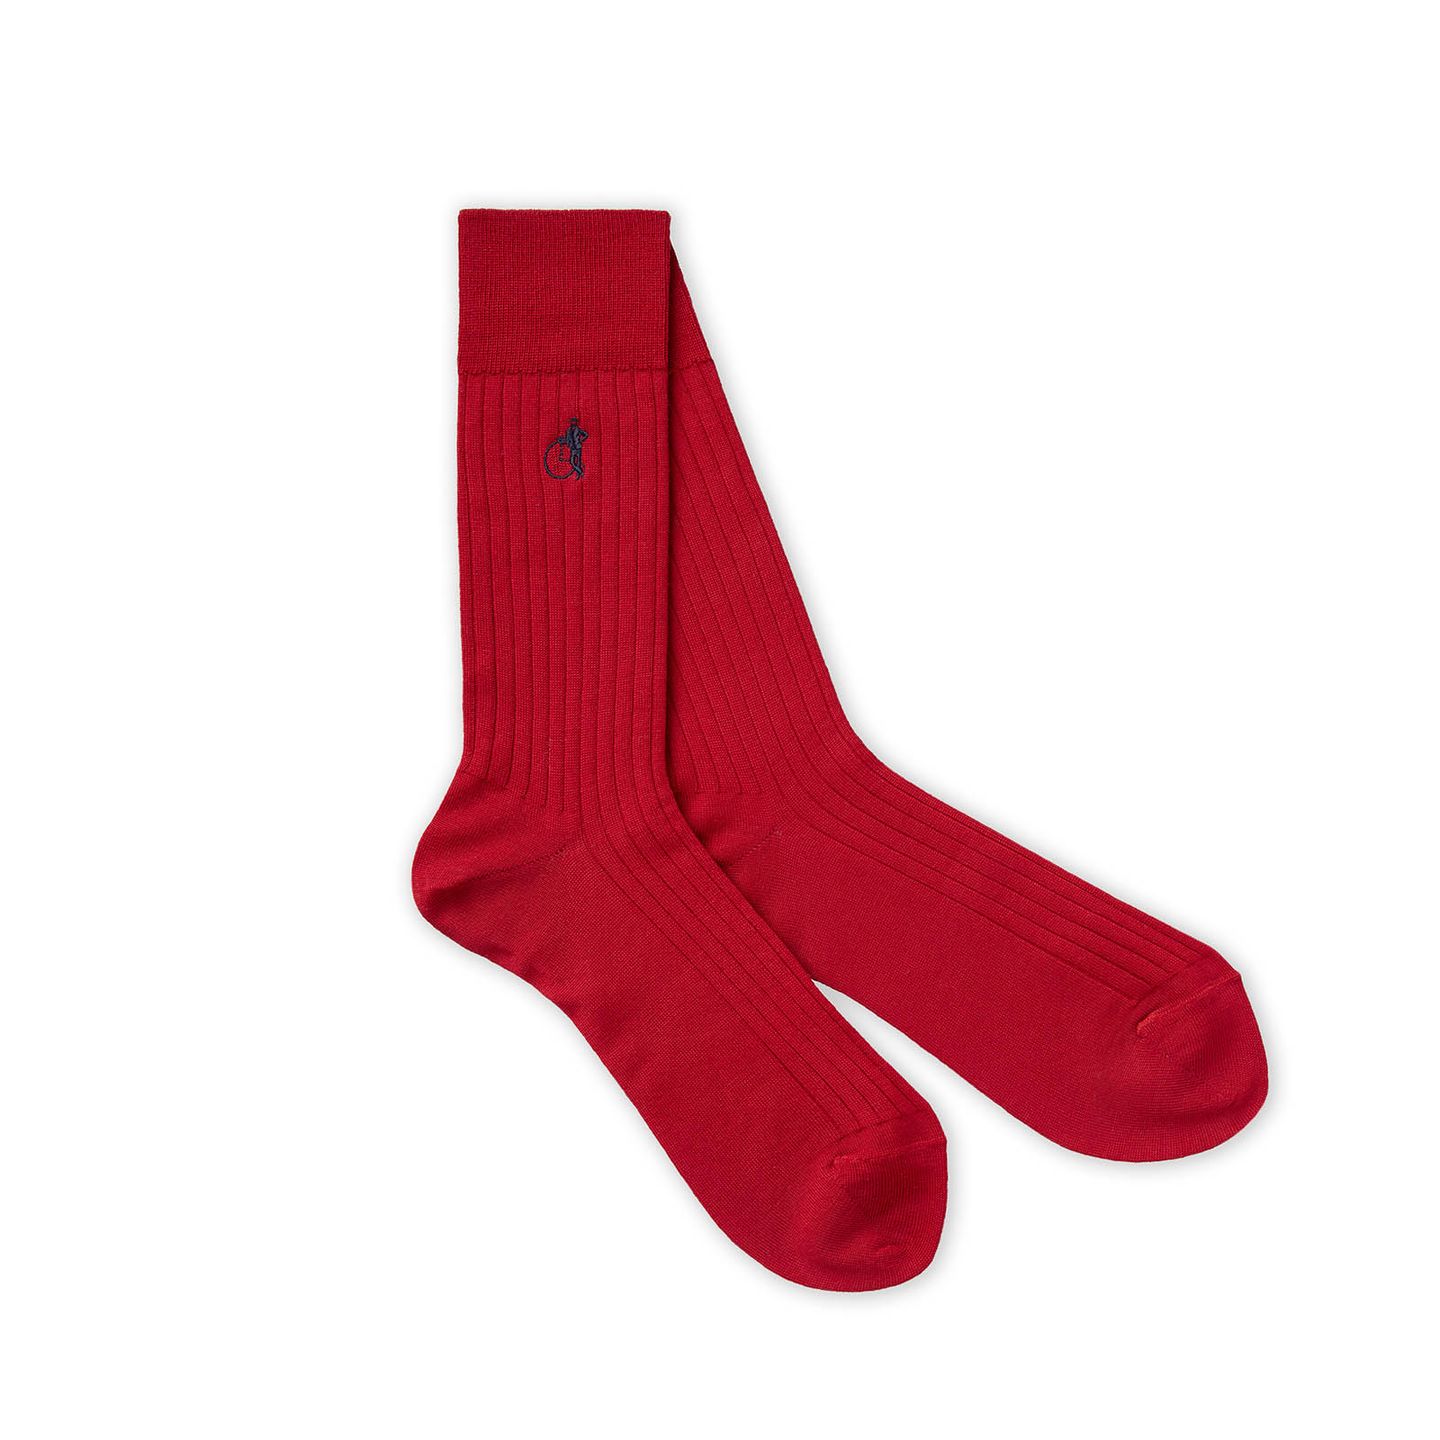 A pair of red socks with a white background